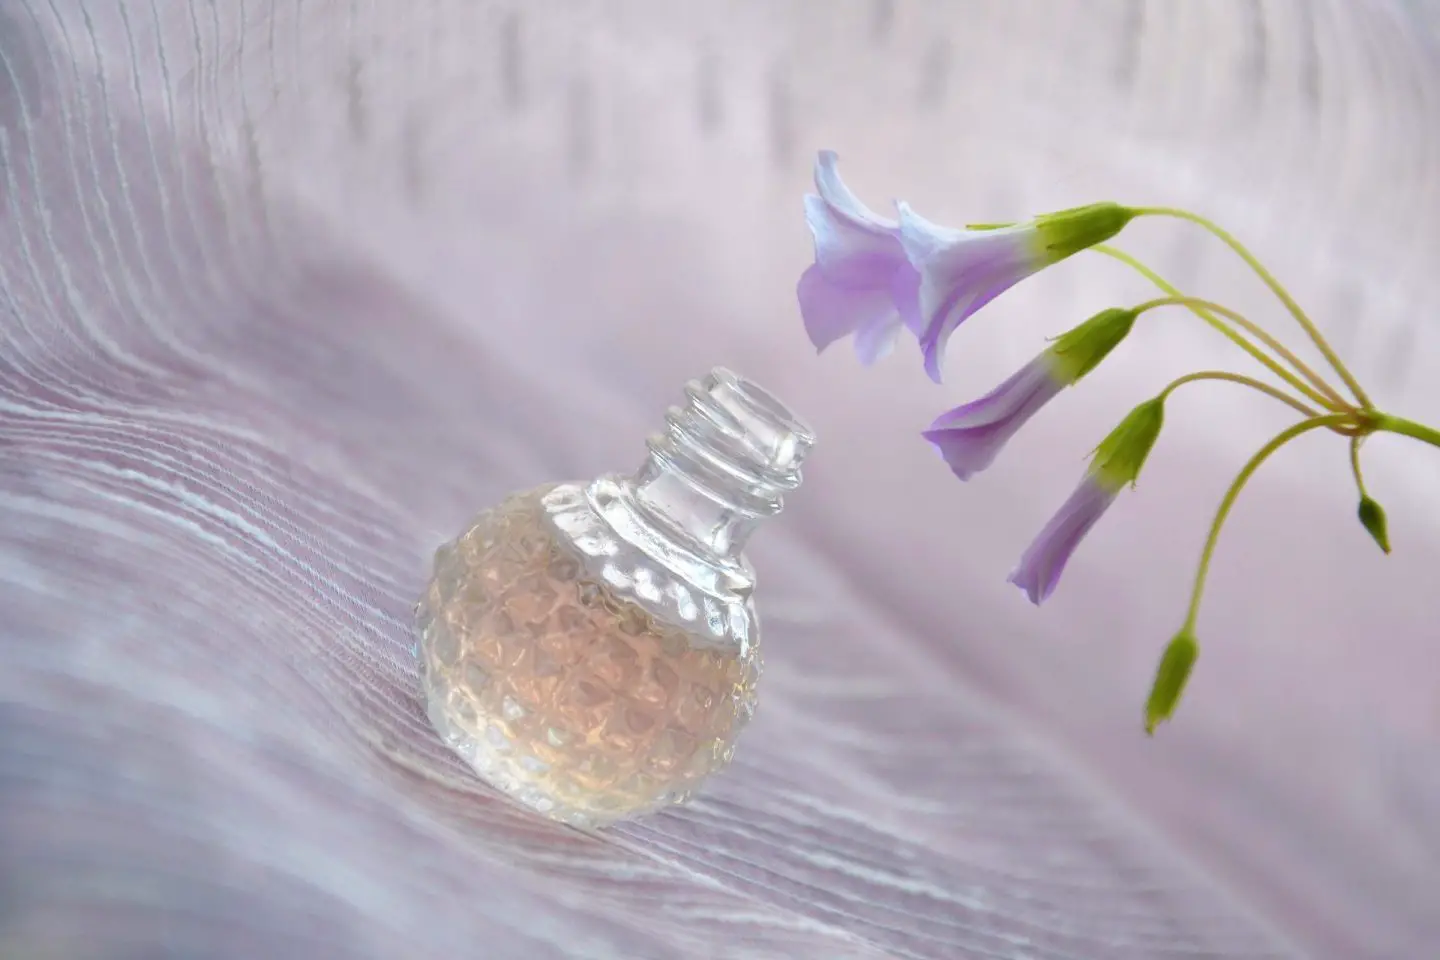 A bottle of perfume next to a flower